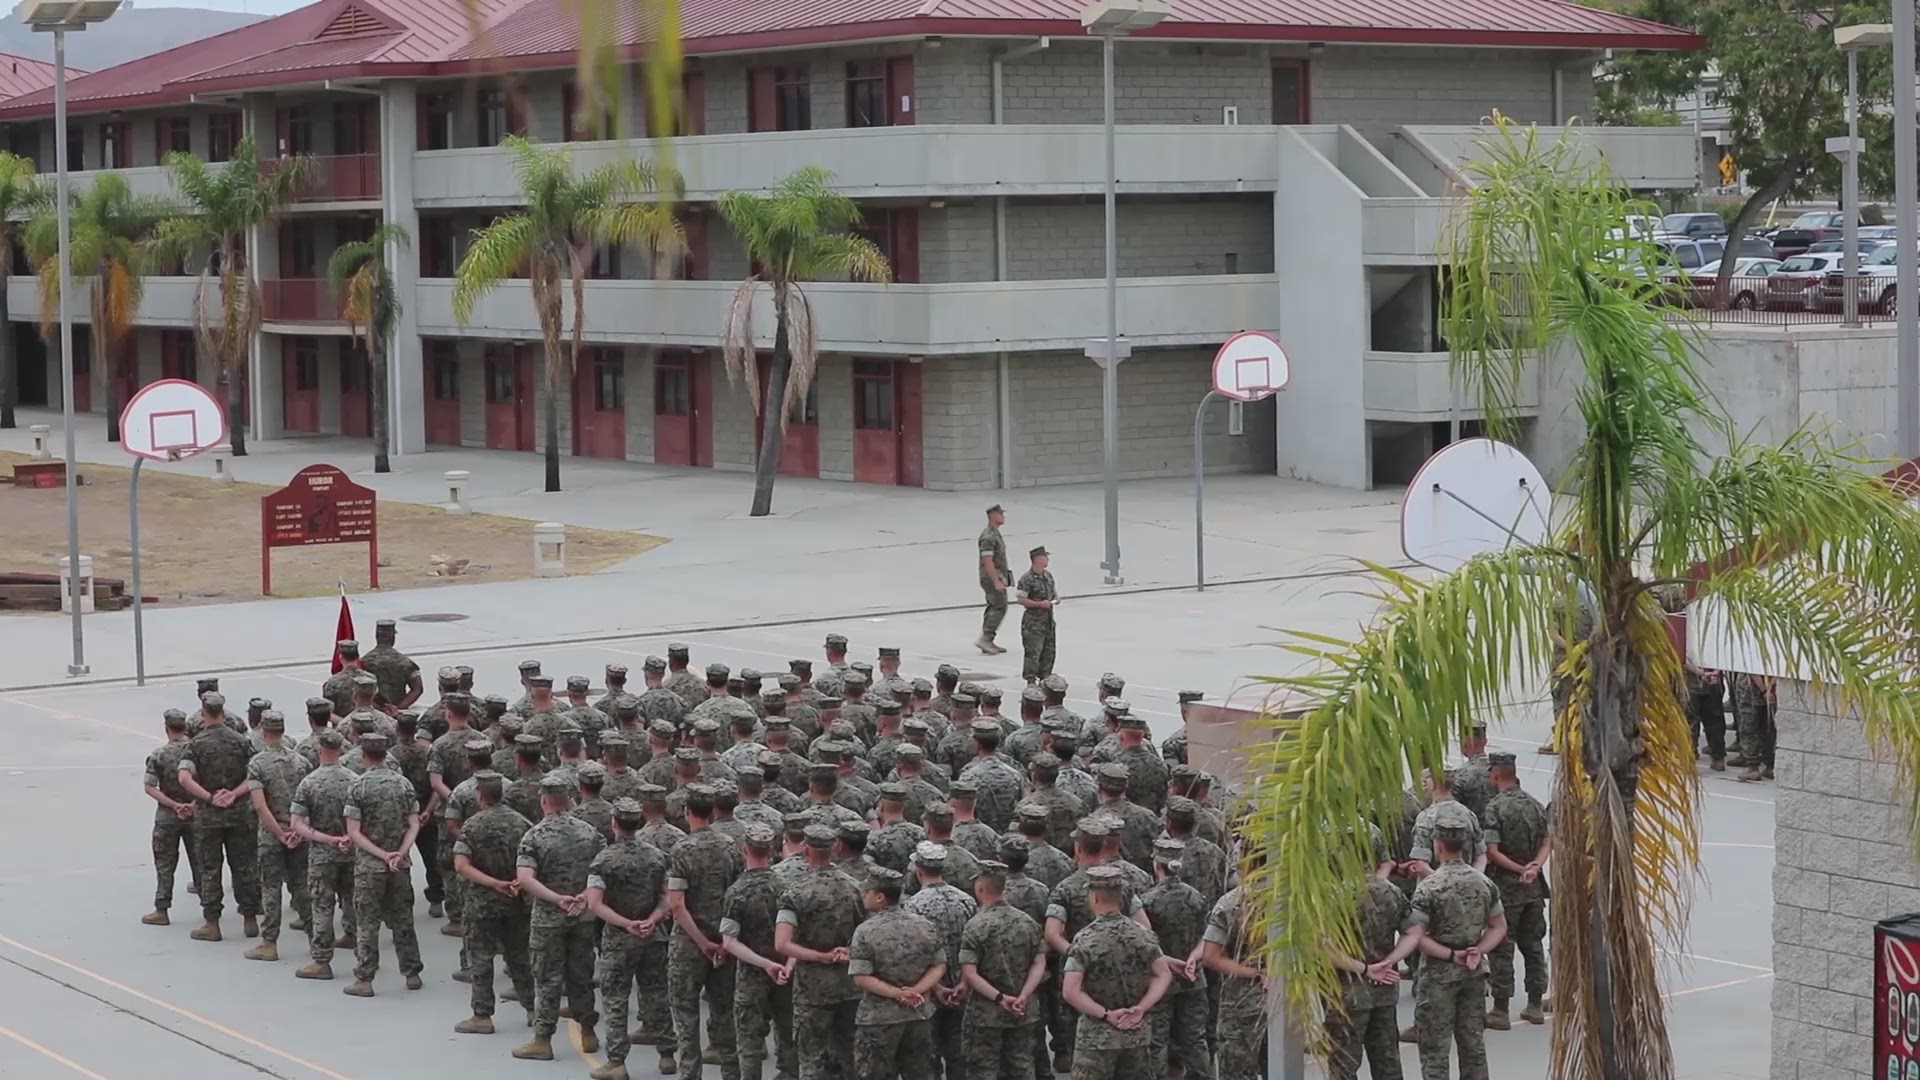 Video has surfaced of the arrest of 16 Marines four months ago at Camp Pendleton.